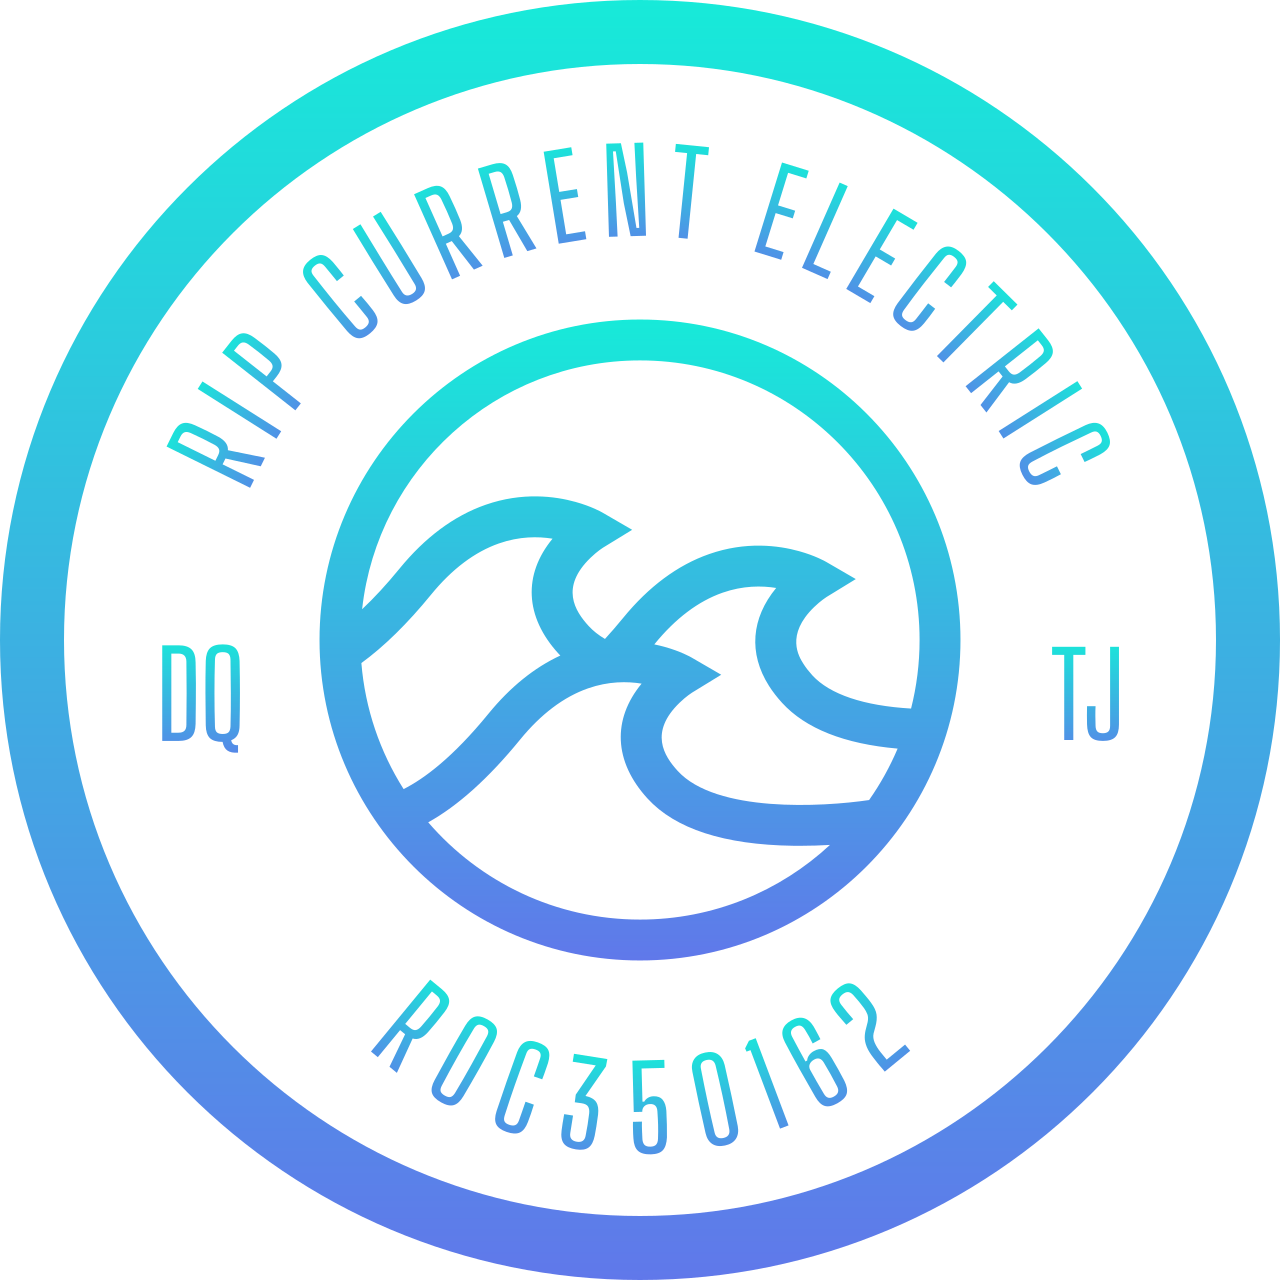 RIP CURRENT ELECTRIC's logo